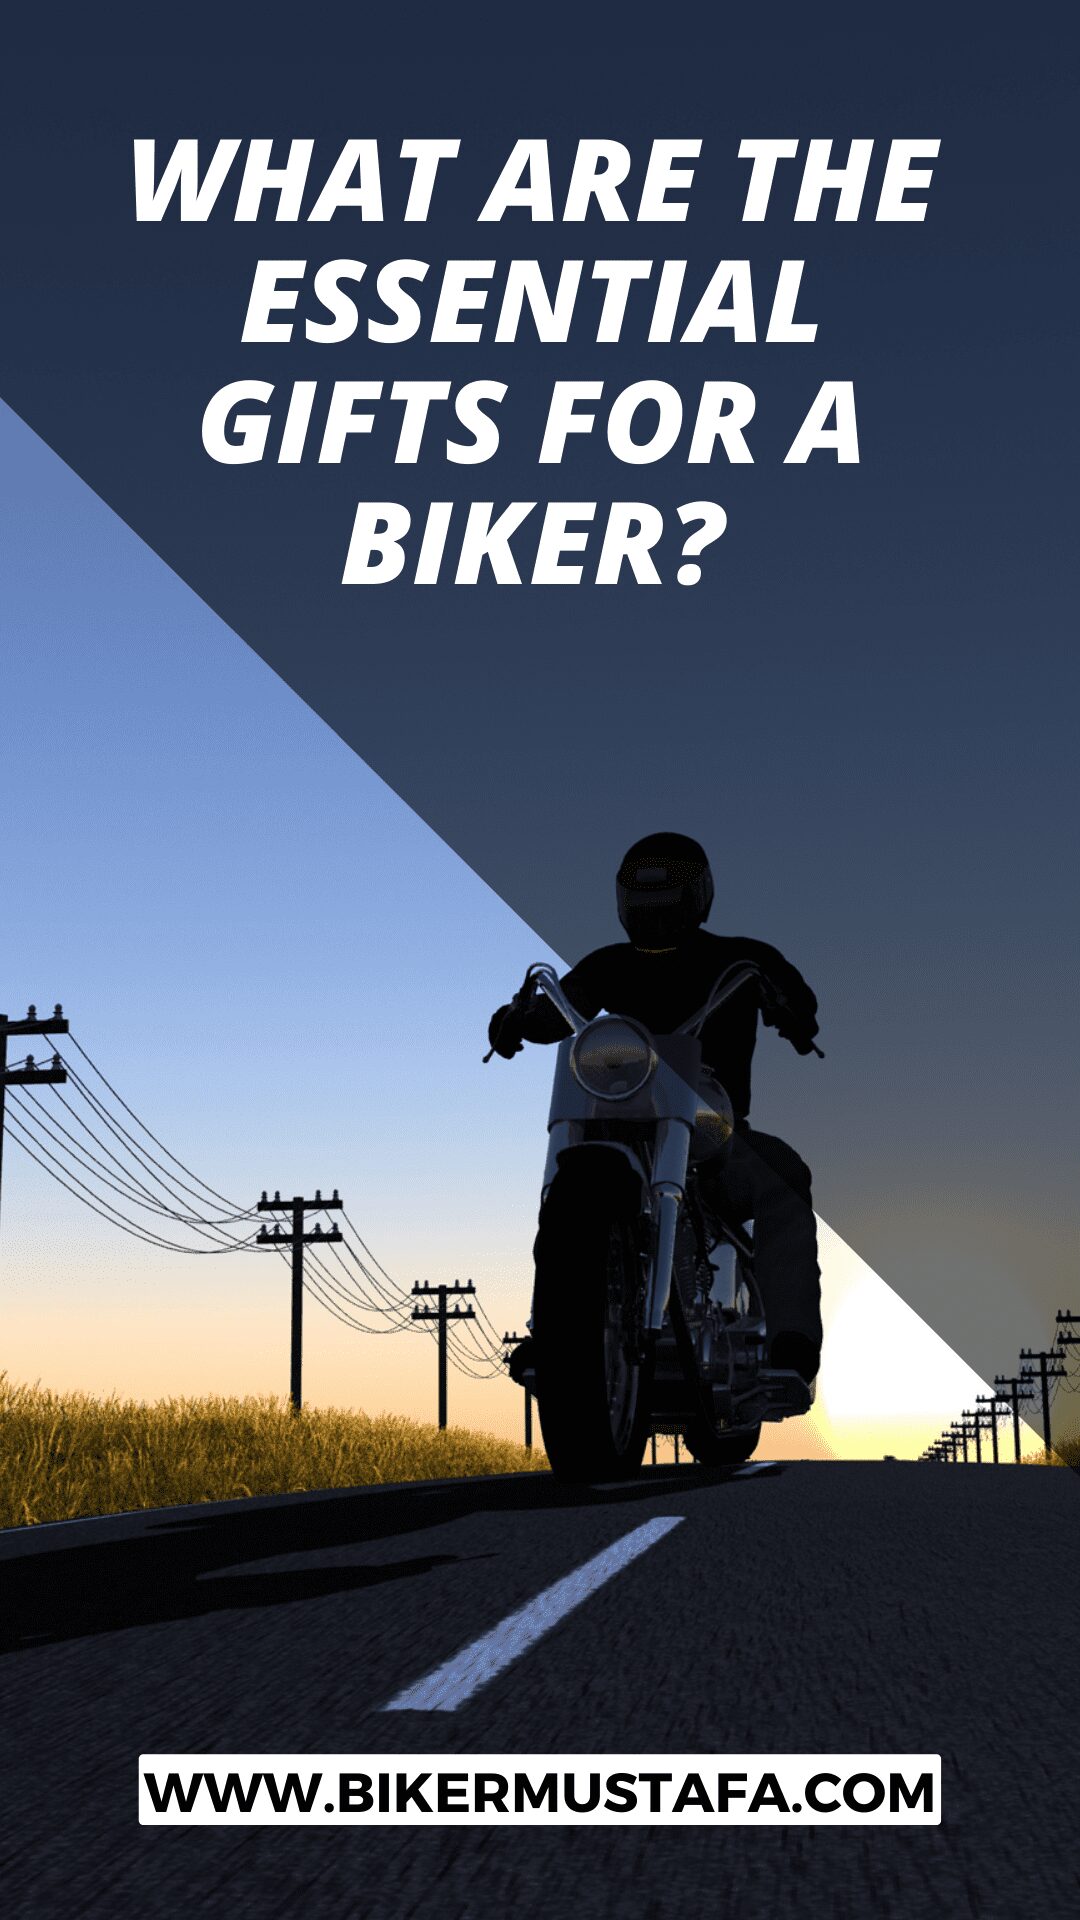 What Are The Essential Gifts For A Biker?